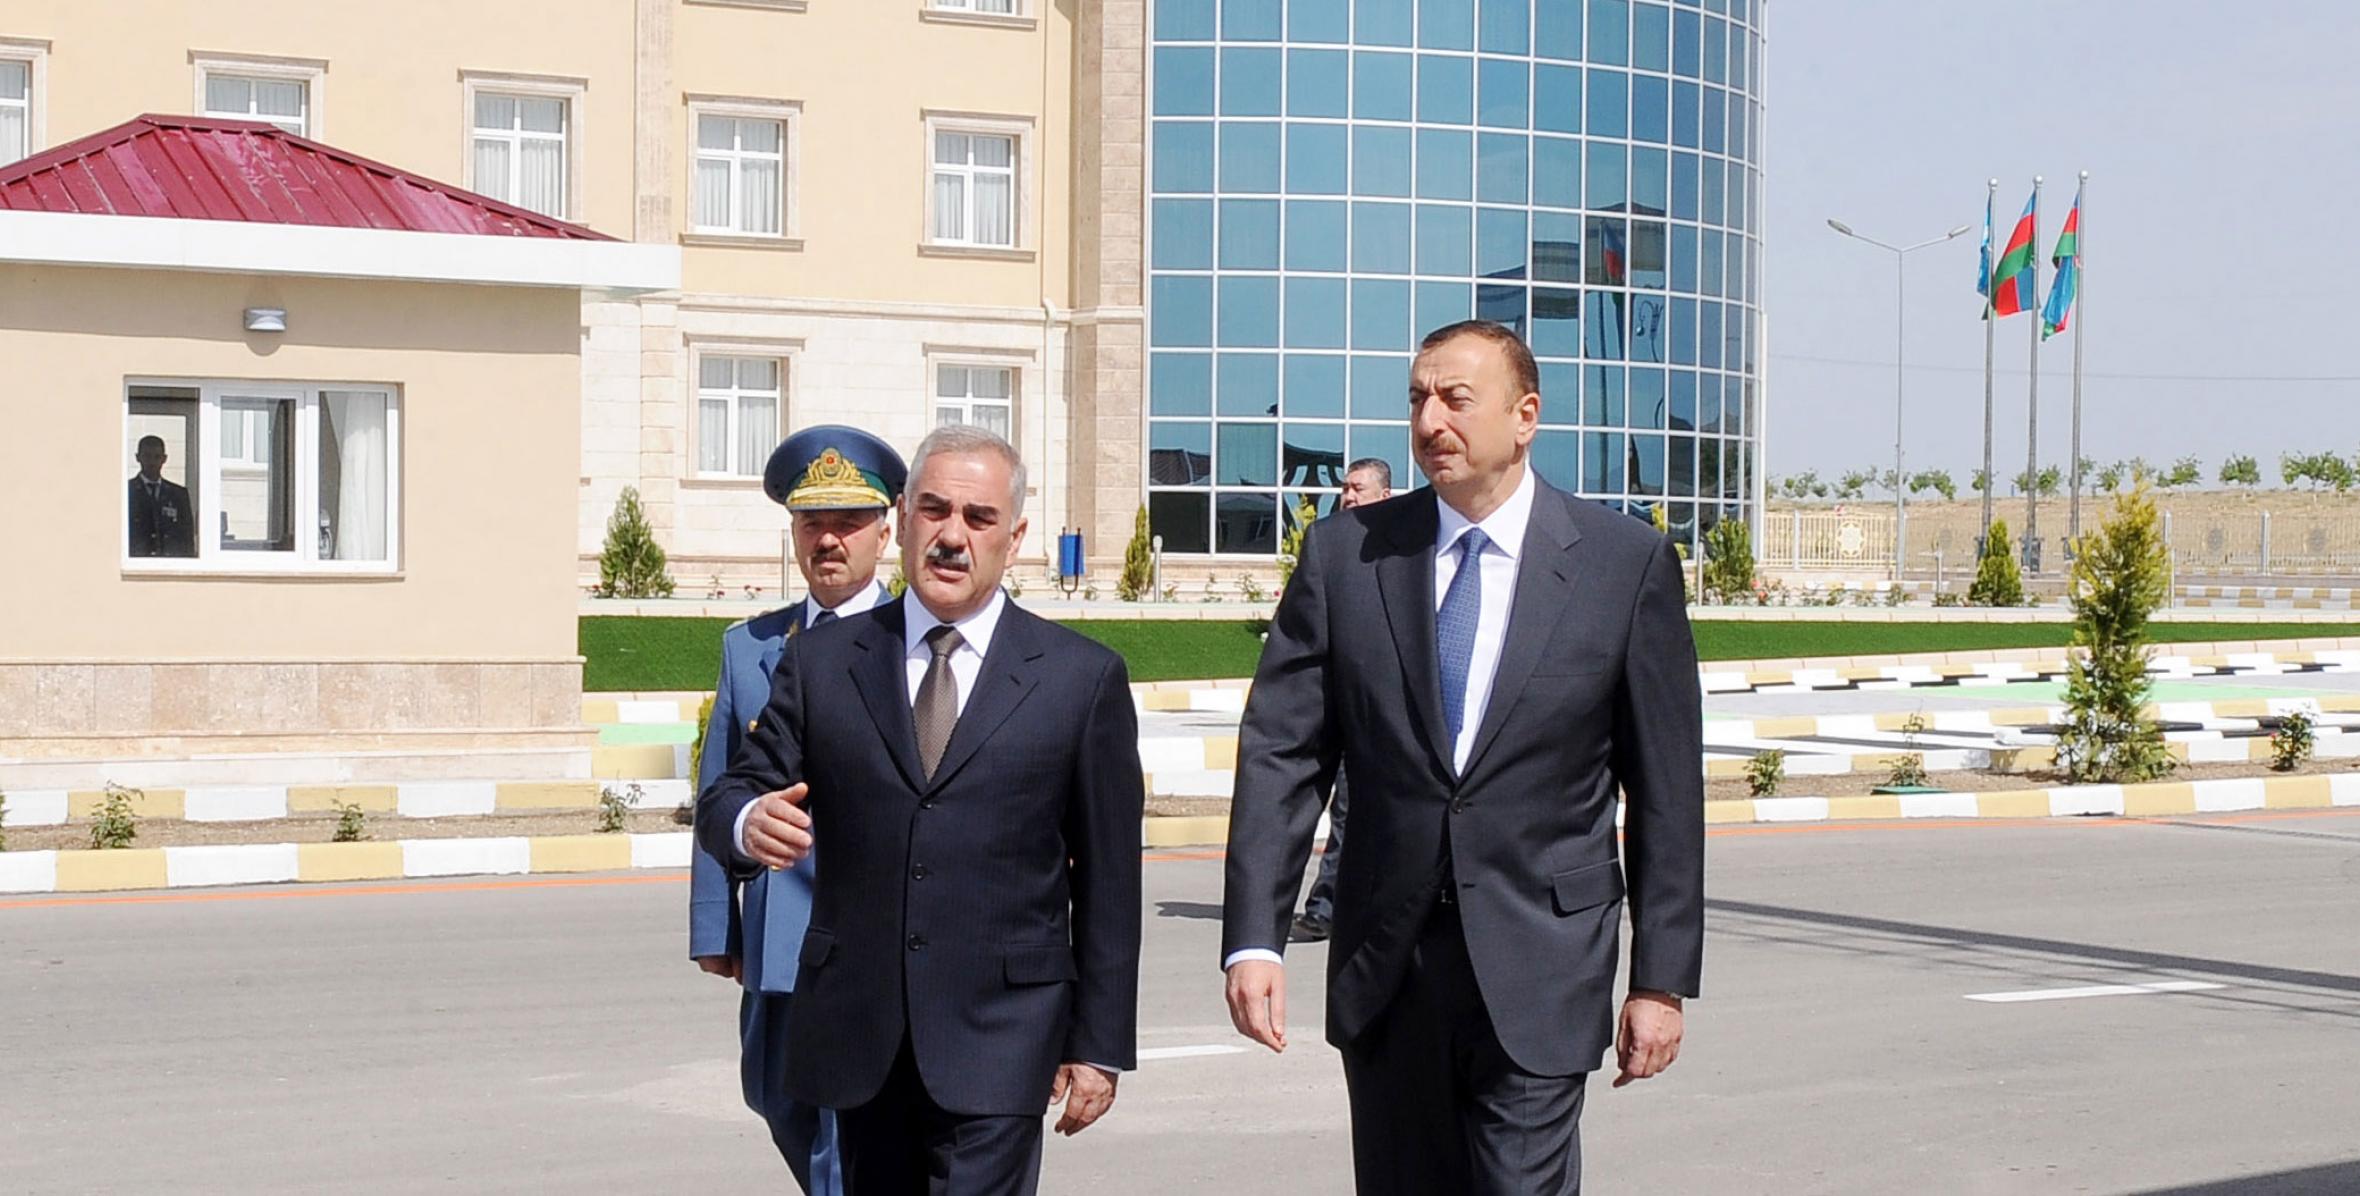 Ilham Aliyev attended the opening of the Nakhchivan City Customs Administration